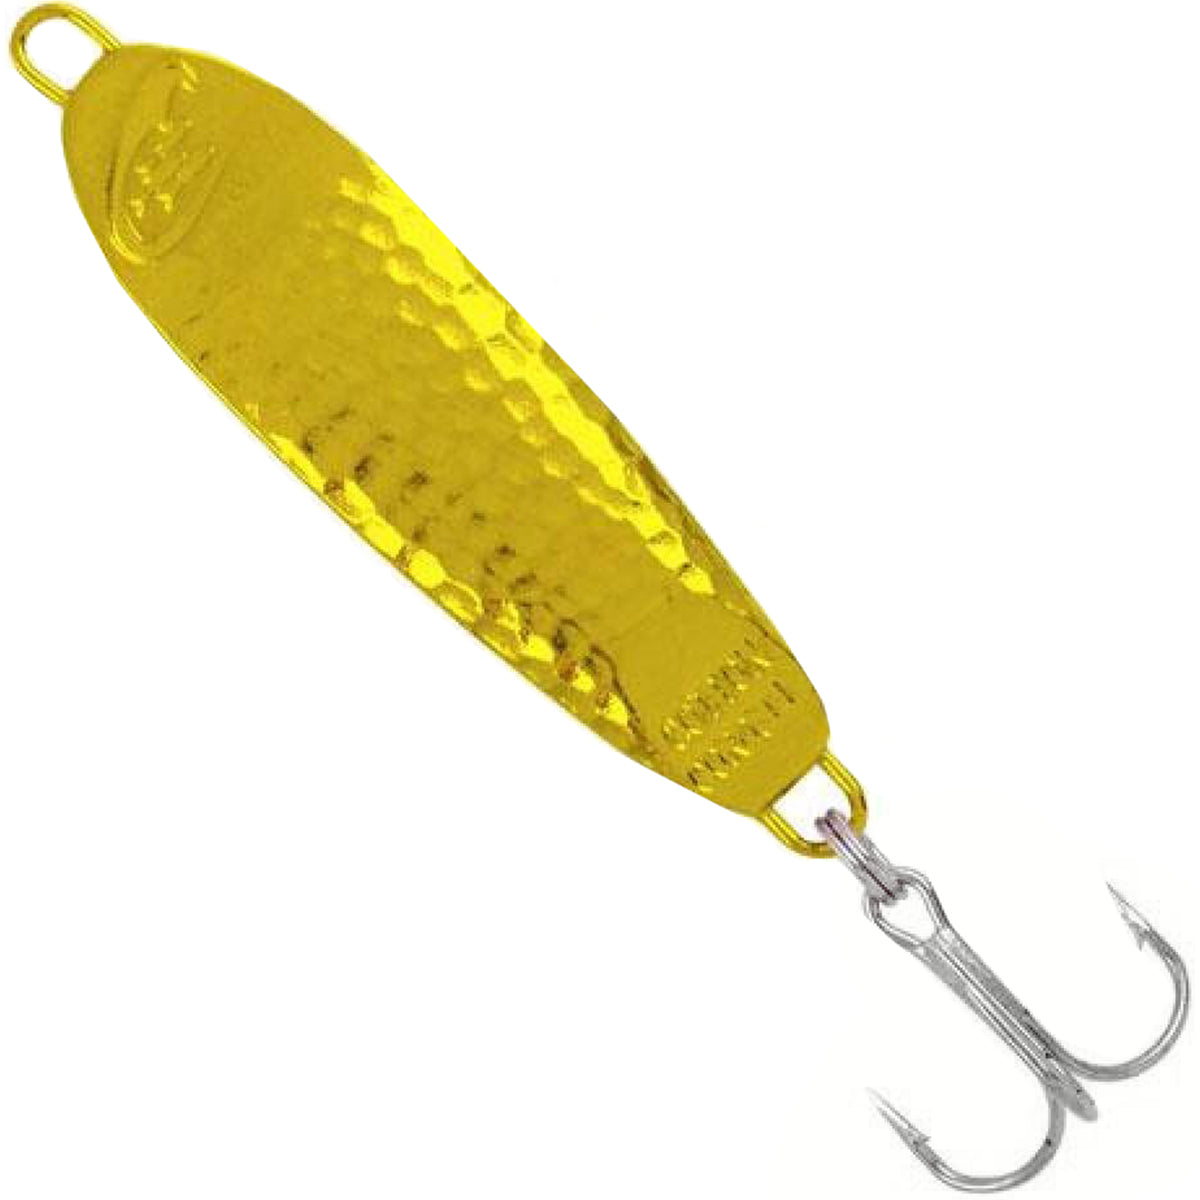 Buy Cotton Cordell Gay Blade, freshwater lure